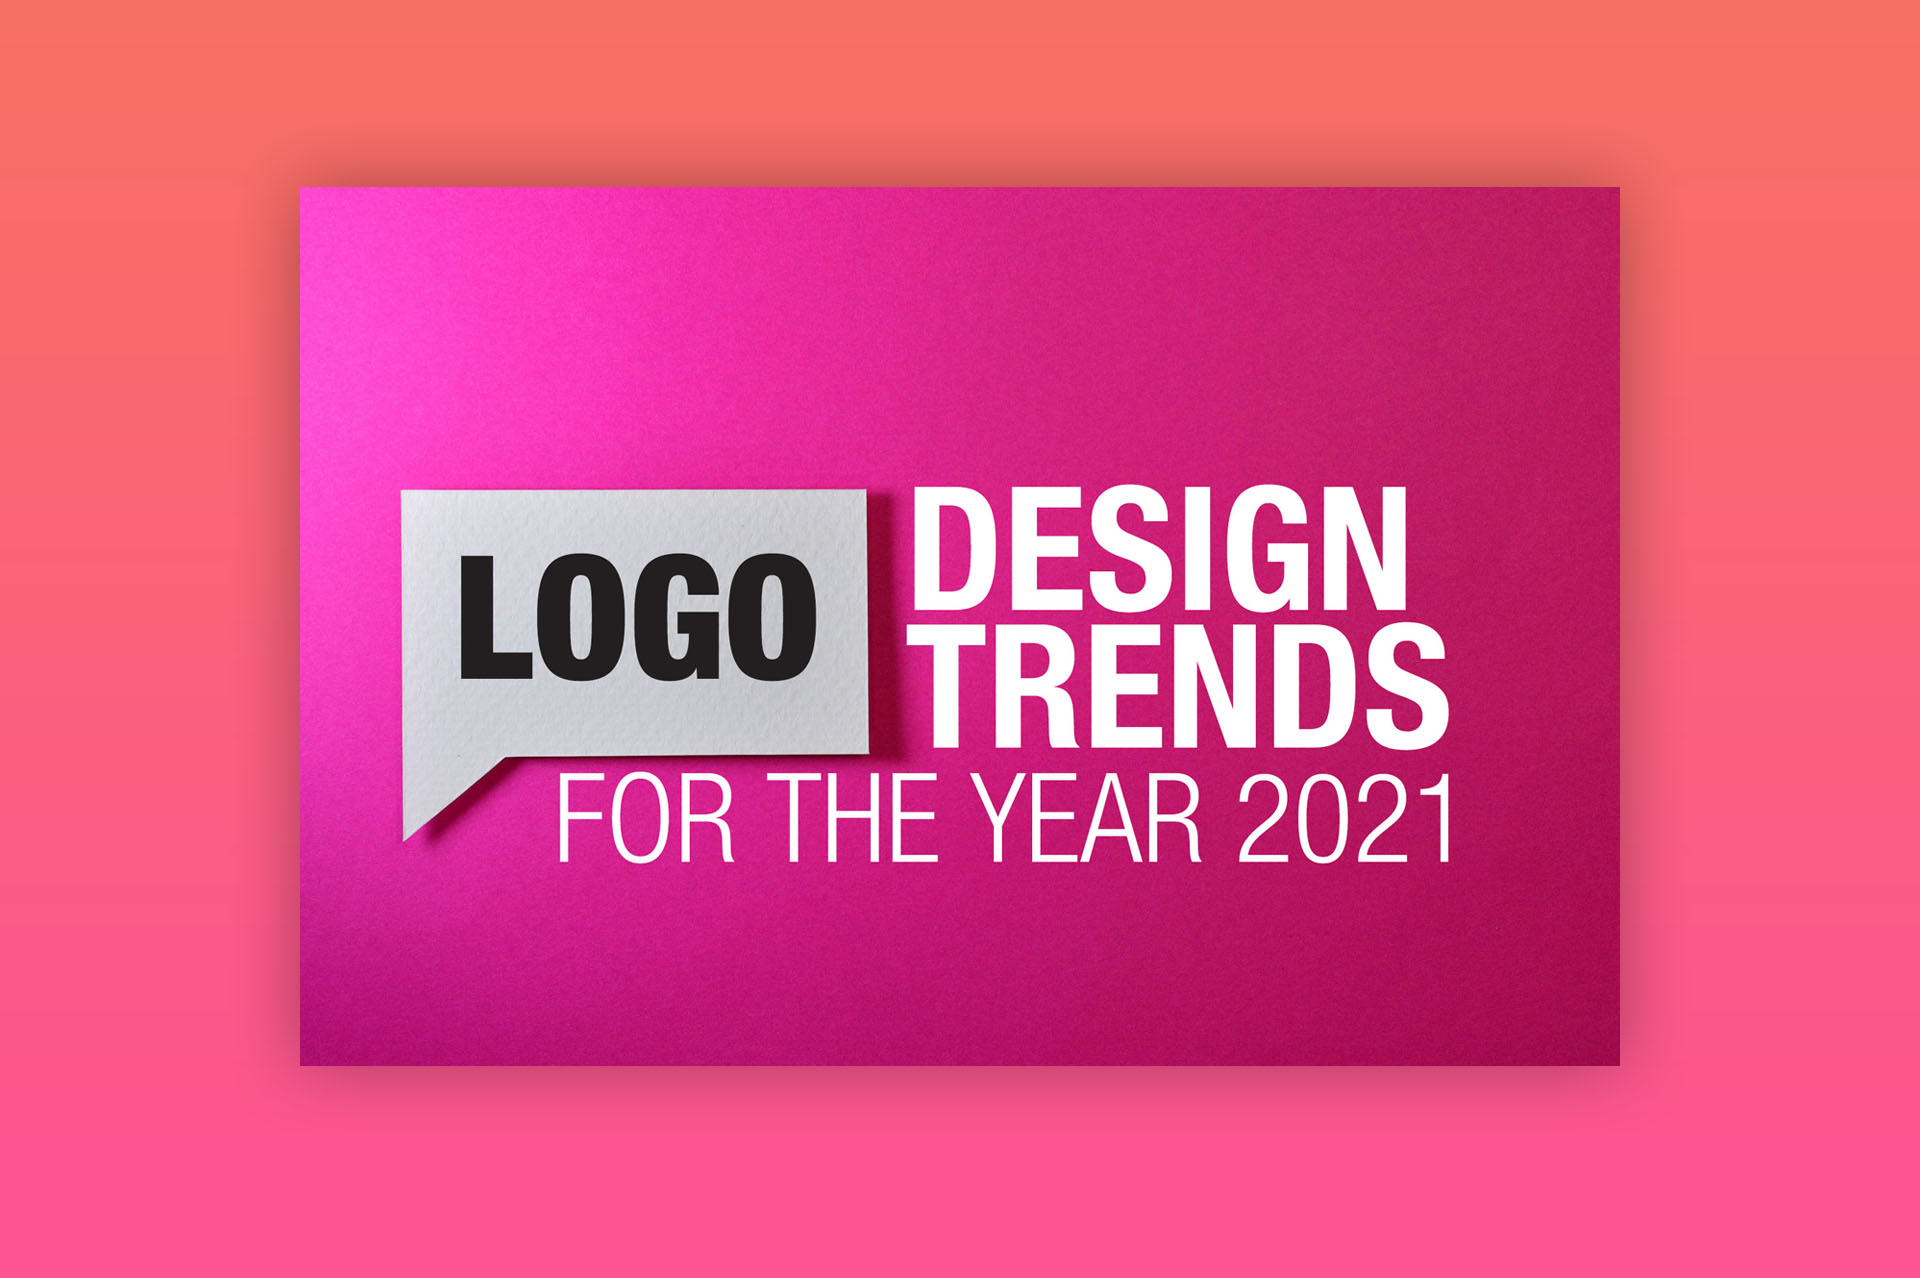 Logo Design Trends for the Year 2021